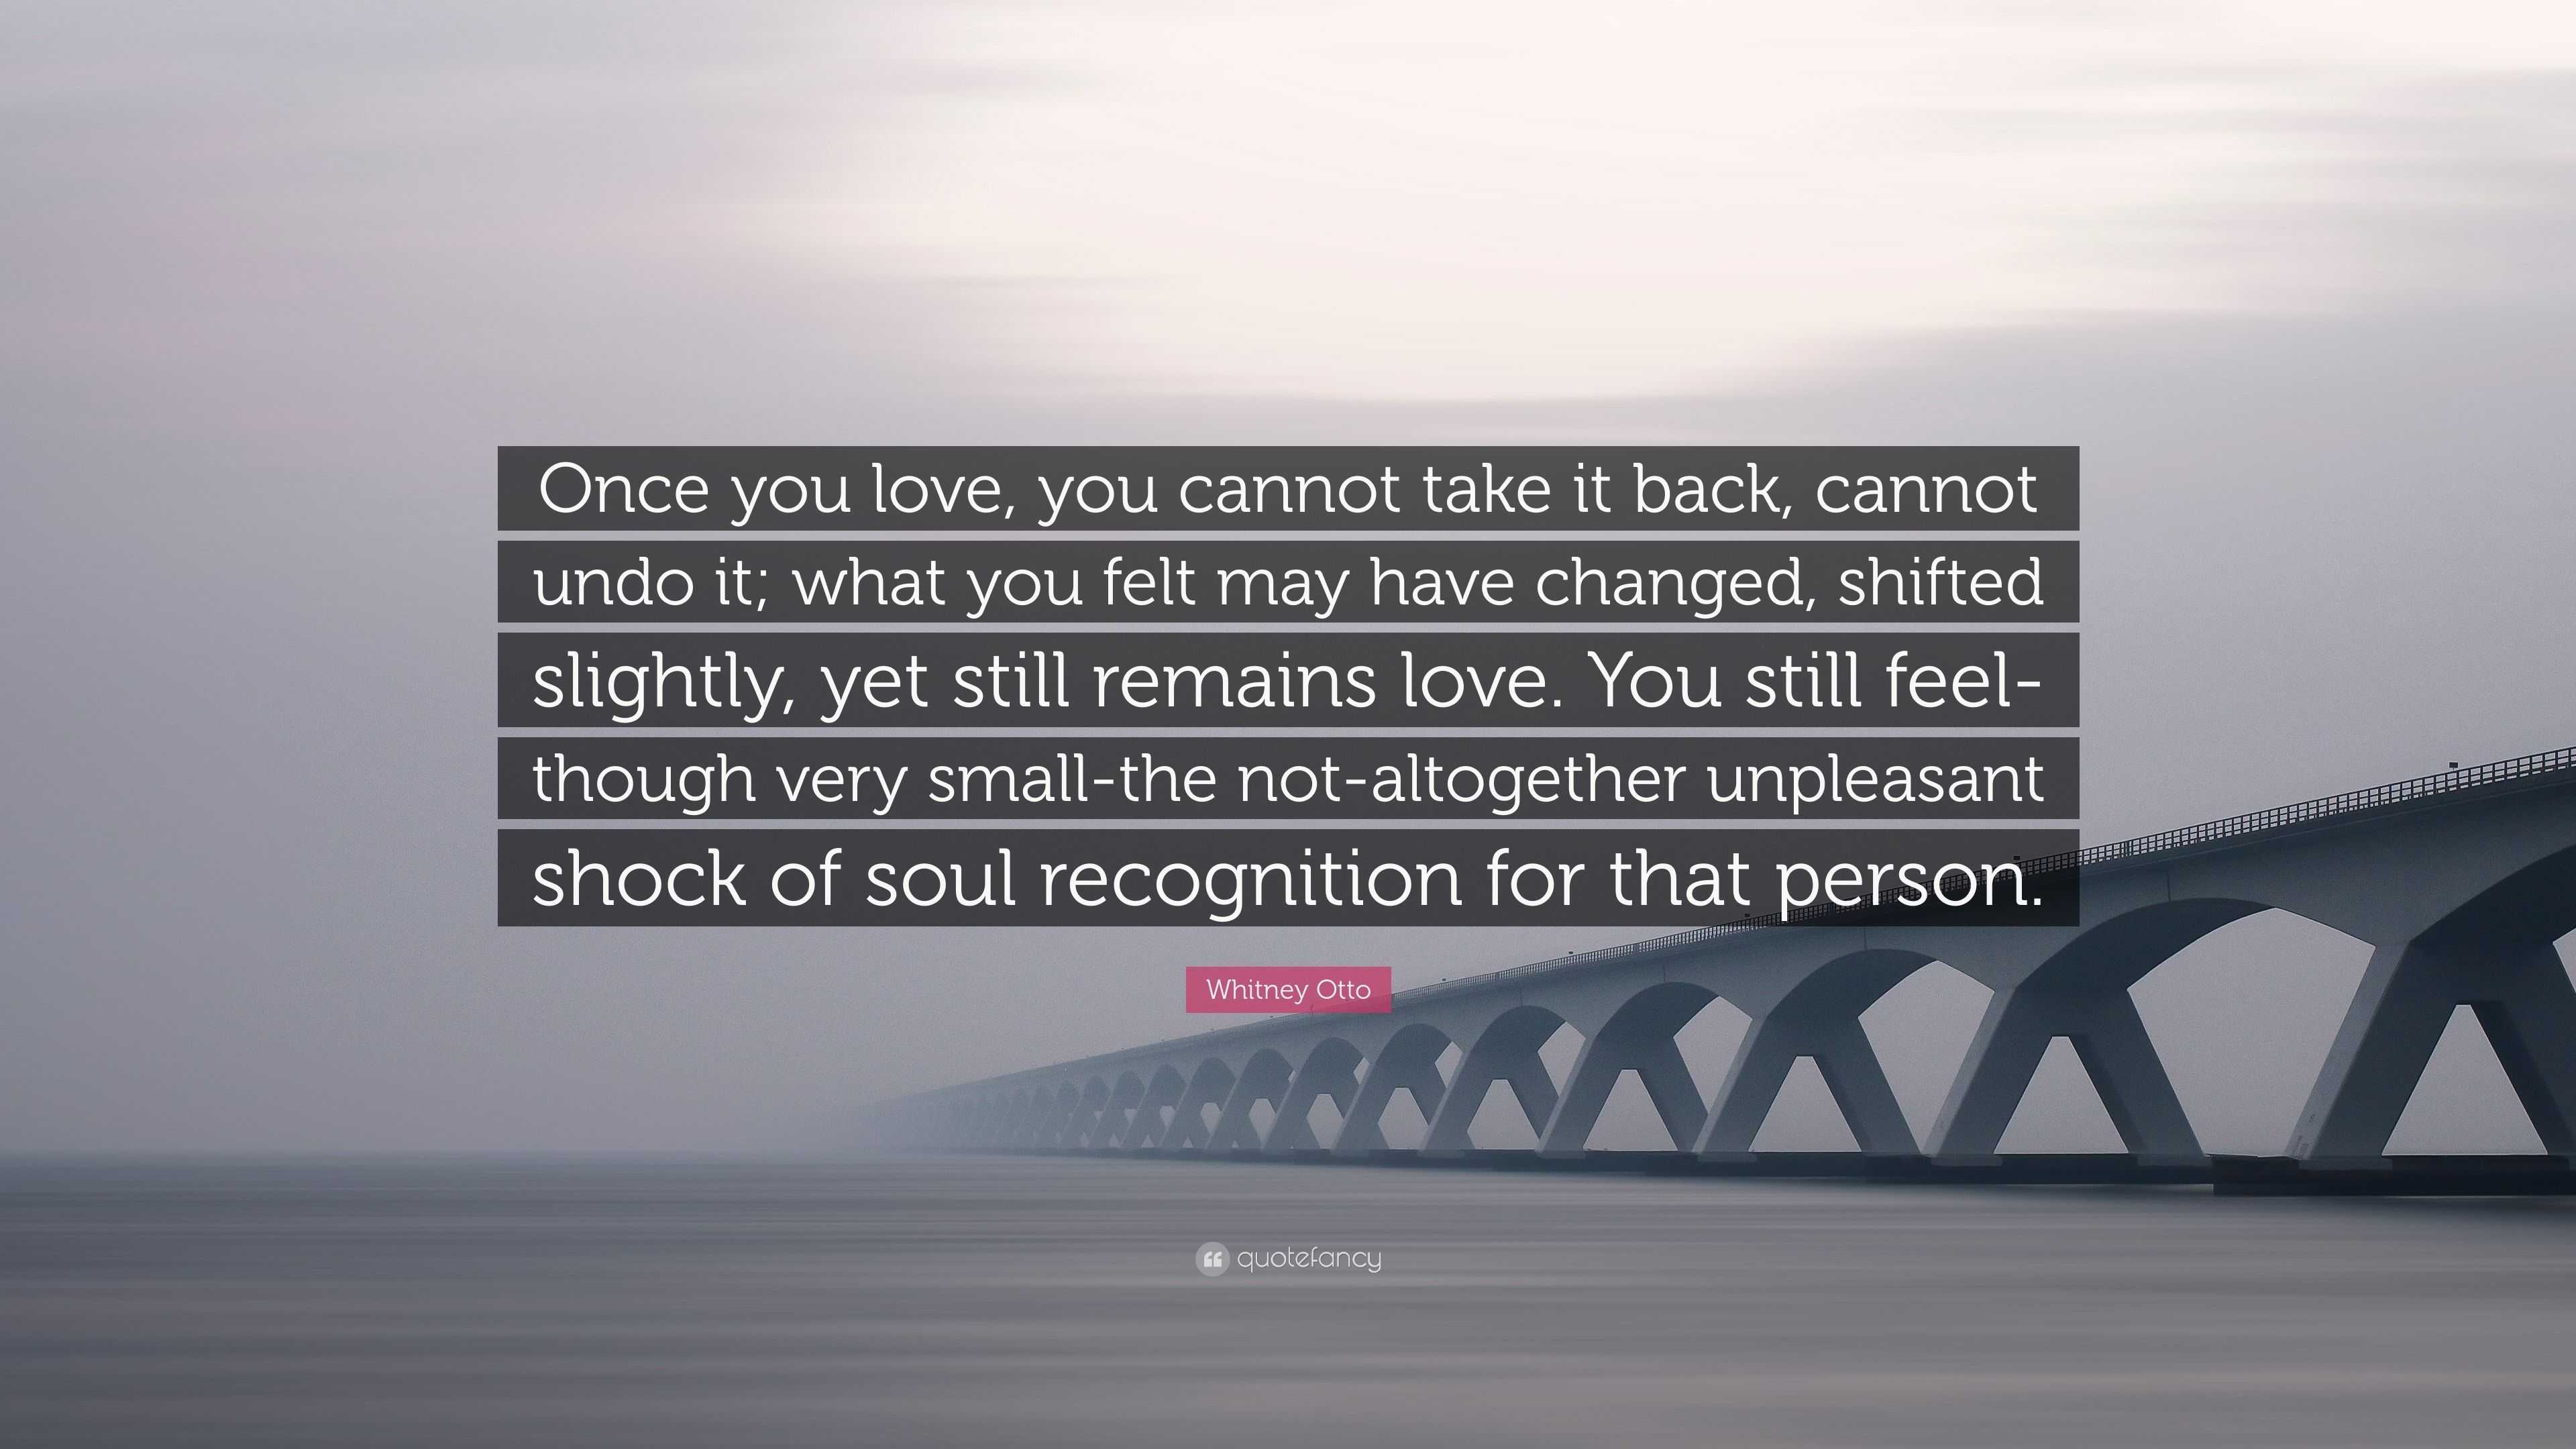 Whitney Otto Quote: “Once you love, you cannot take it back, cannot undo it;  what you felt may have changed, shifted slightly, yet still rema”